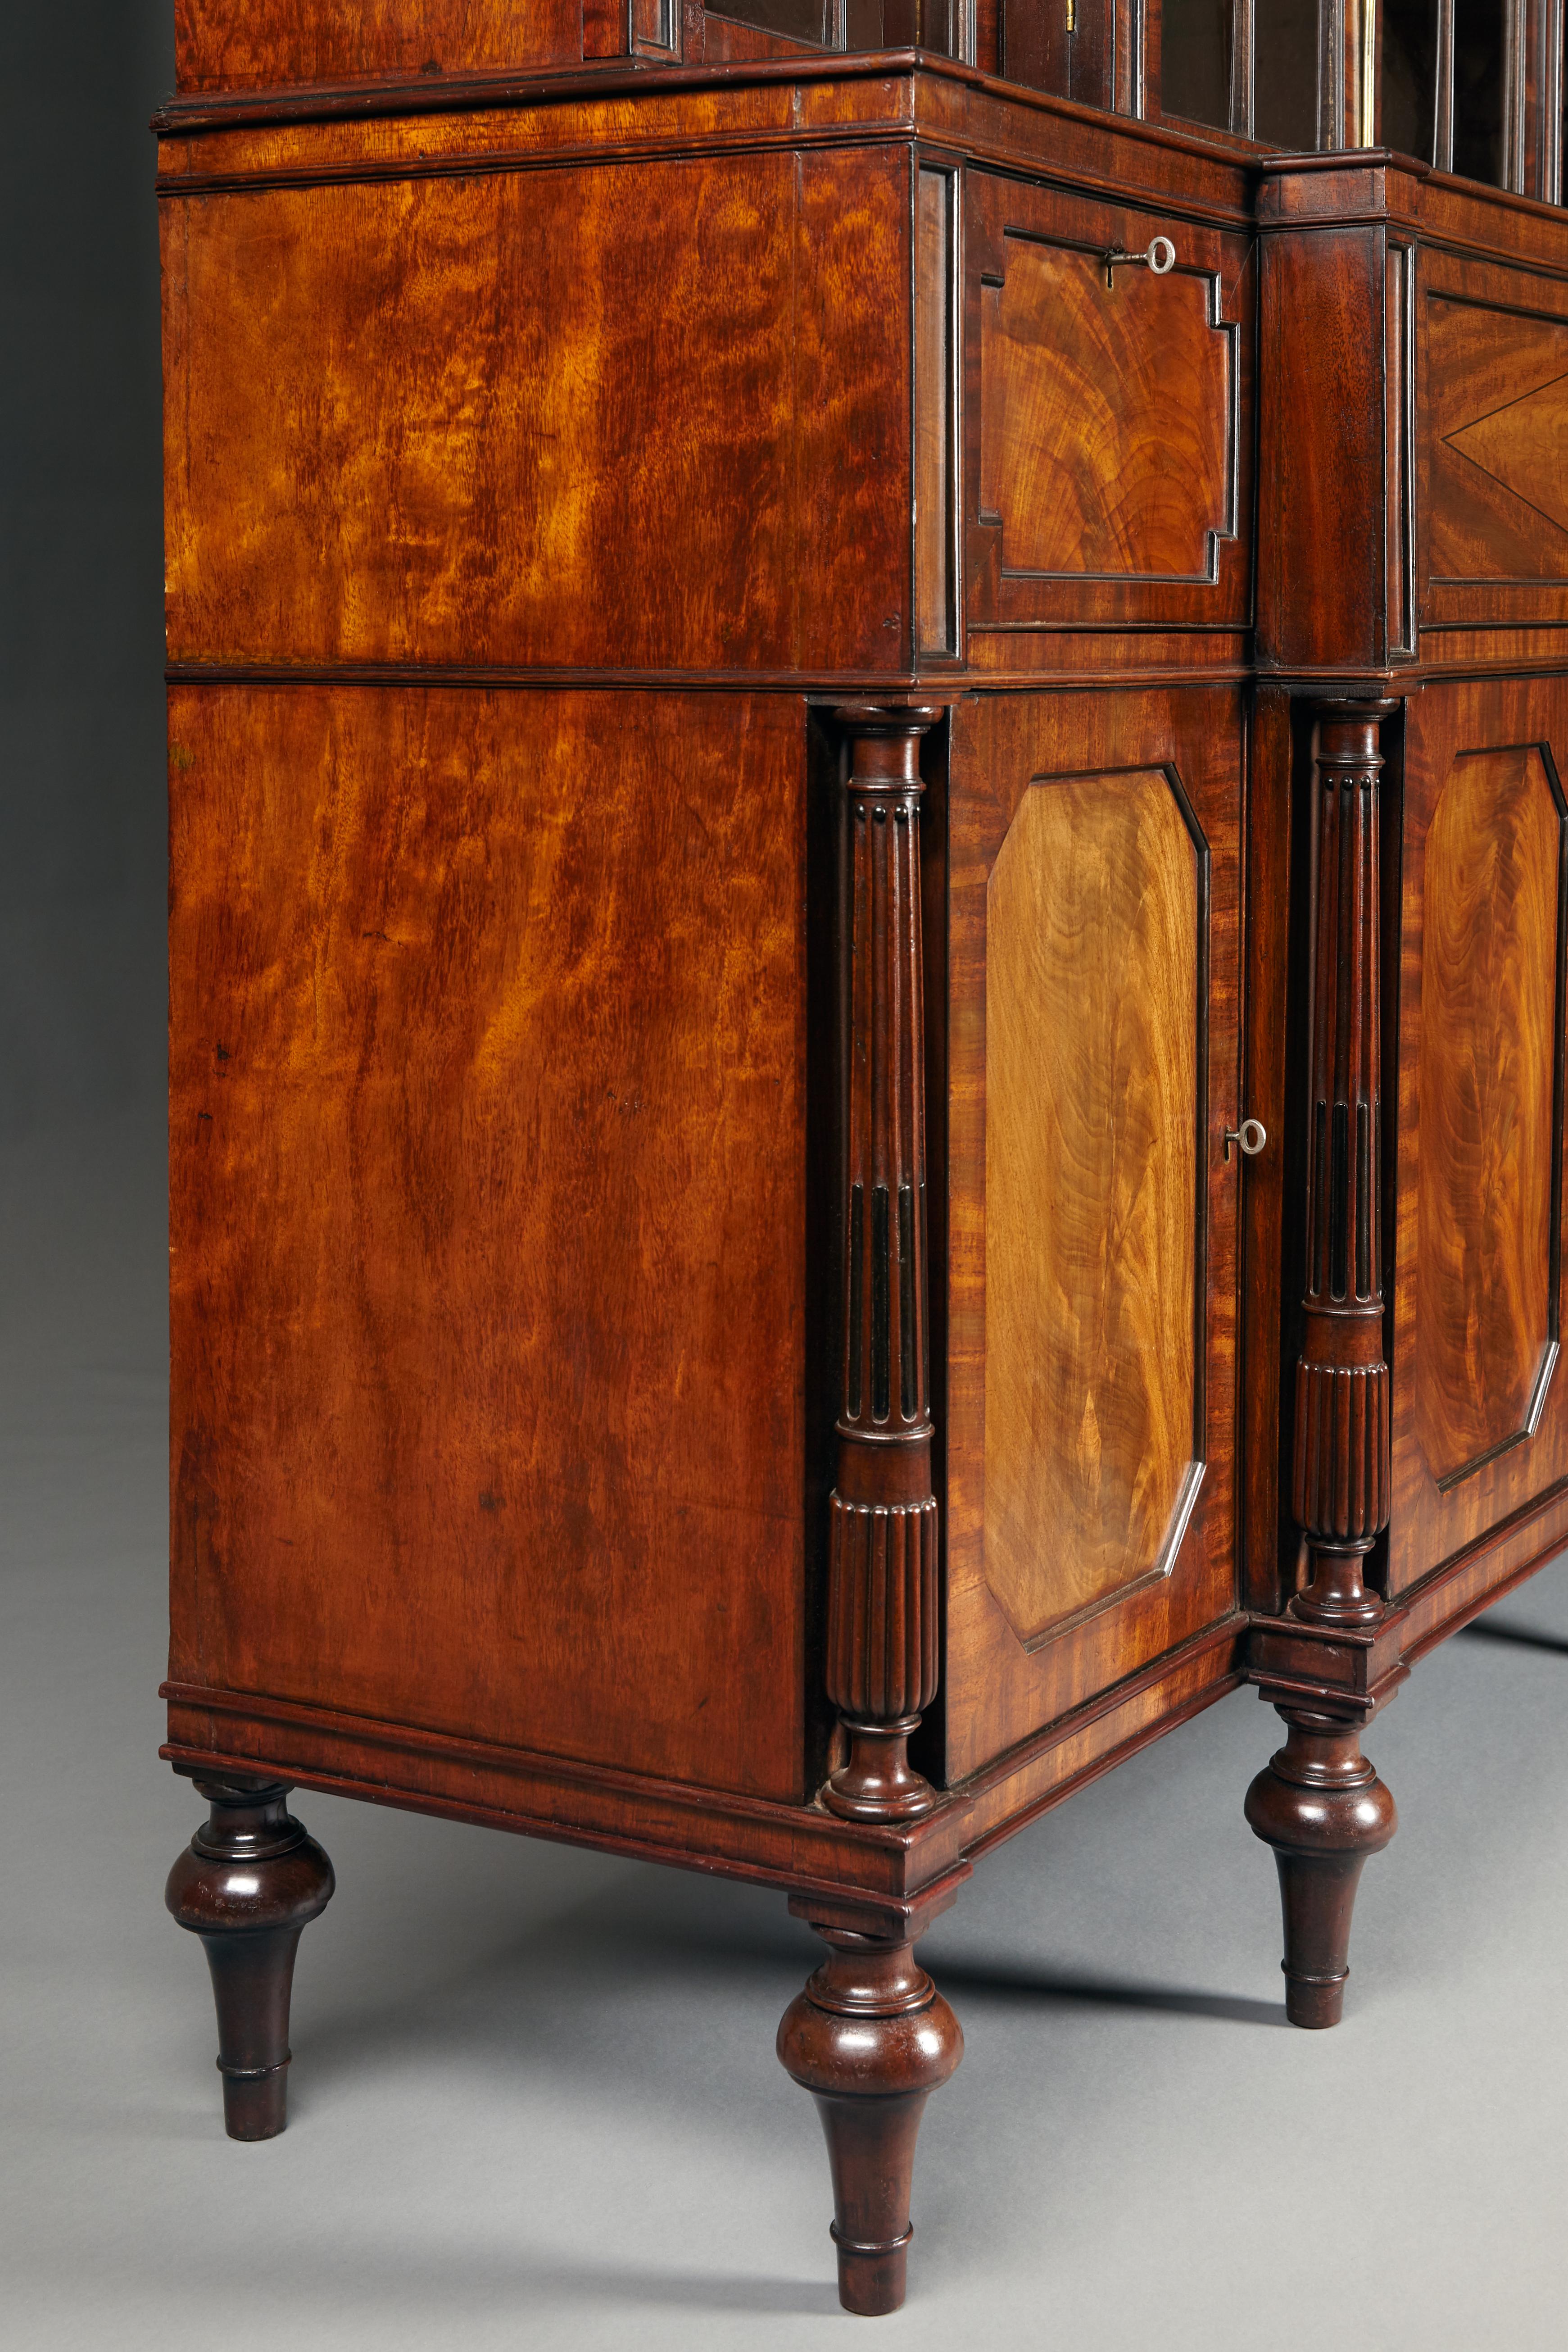 Exceptional George III Period Mahogany Breakfront Bookcase or Display Cabinet In Good Condition For Sale In South Croydon, GB